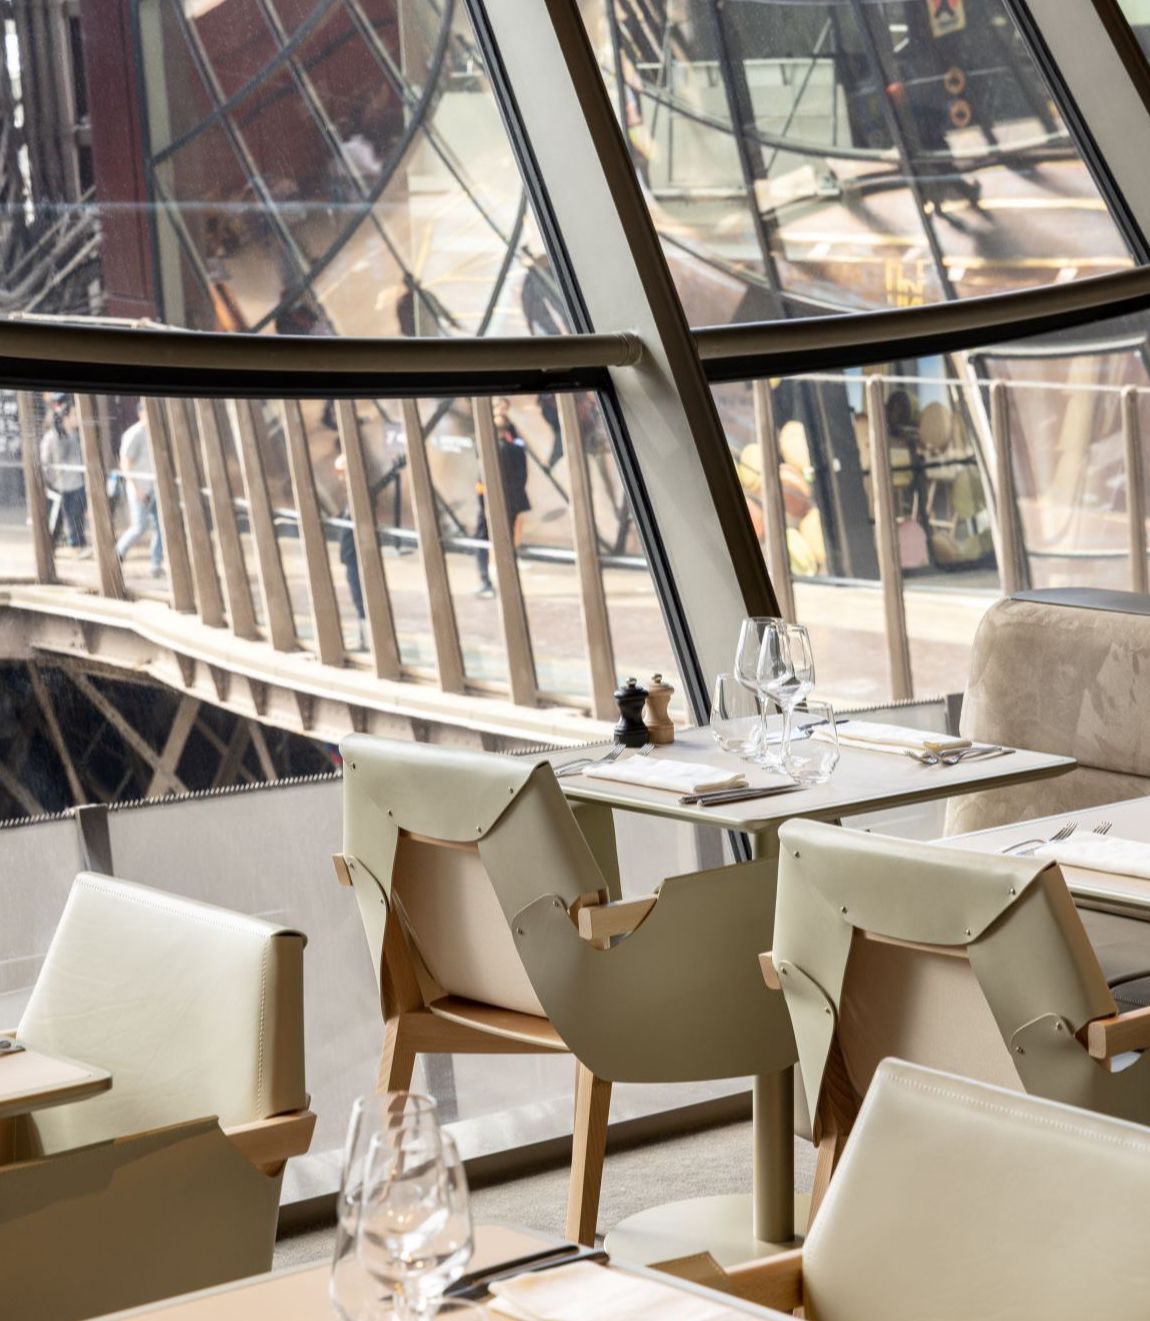 Lunch at the Eiffel tower restaurant "Madame Brasserie" (reserved access)